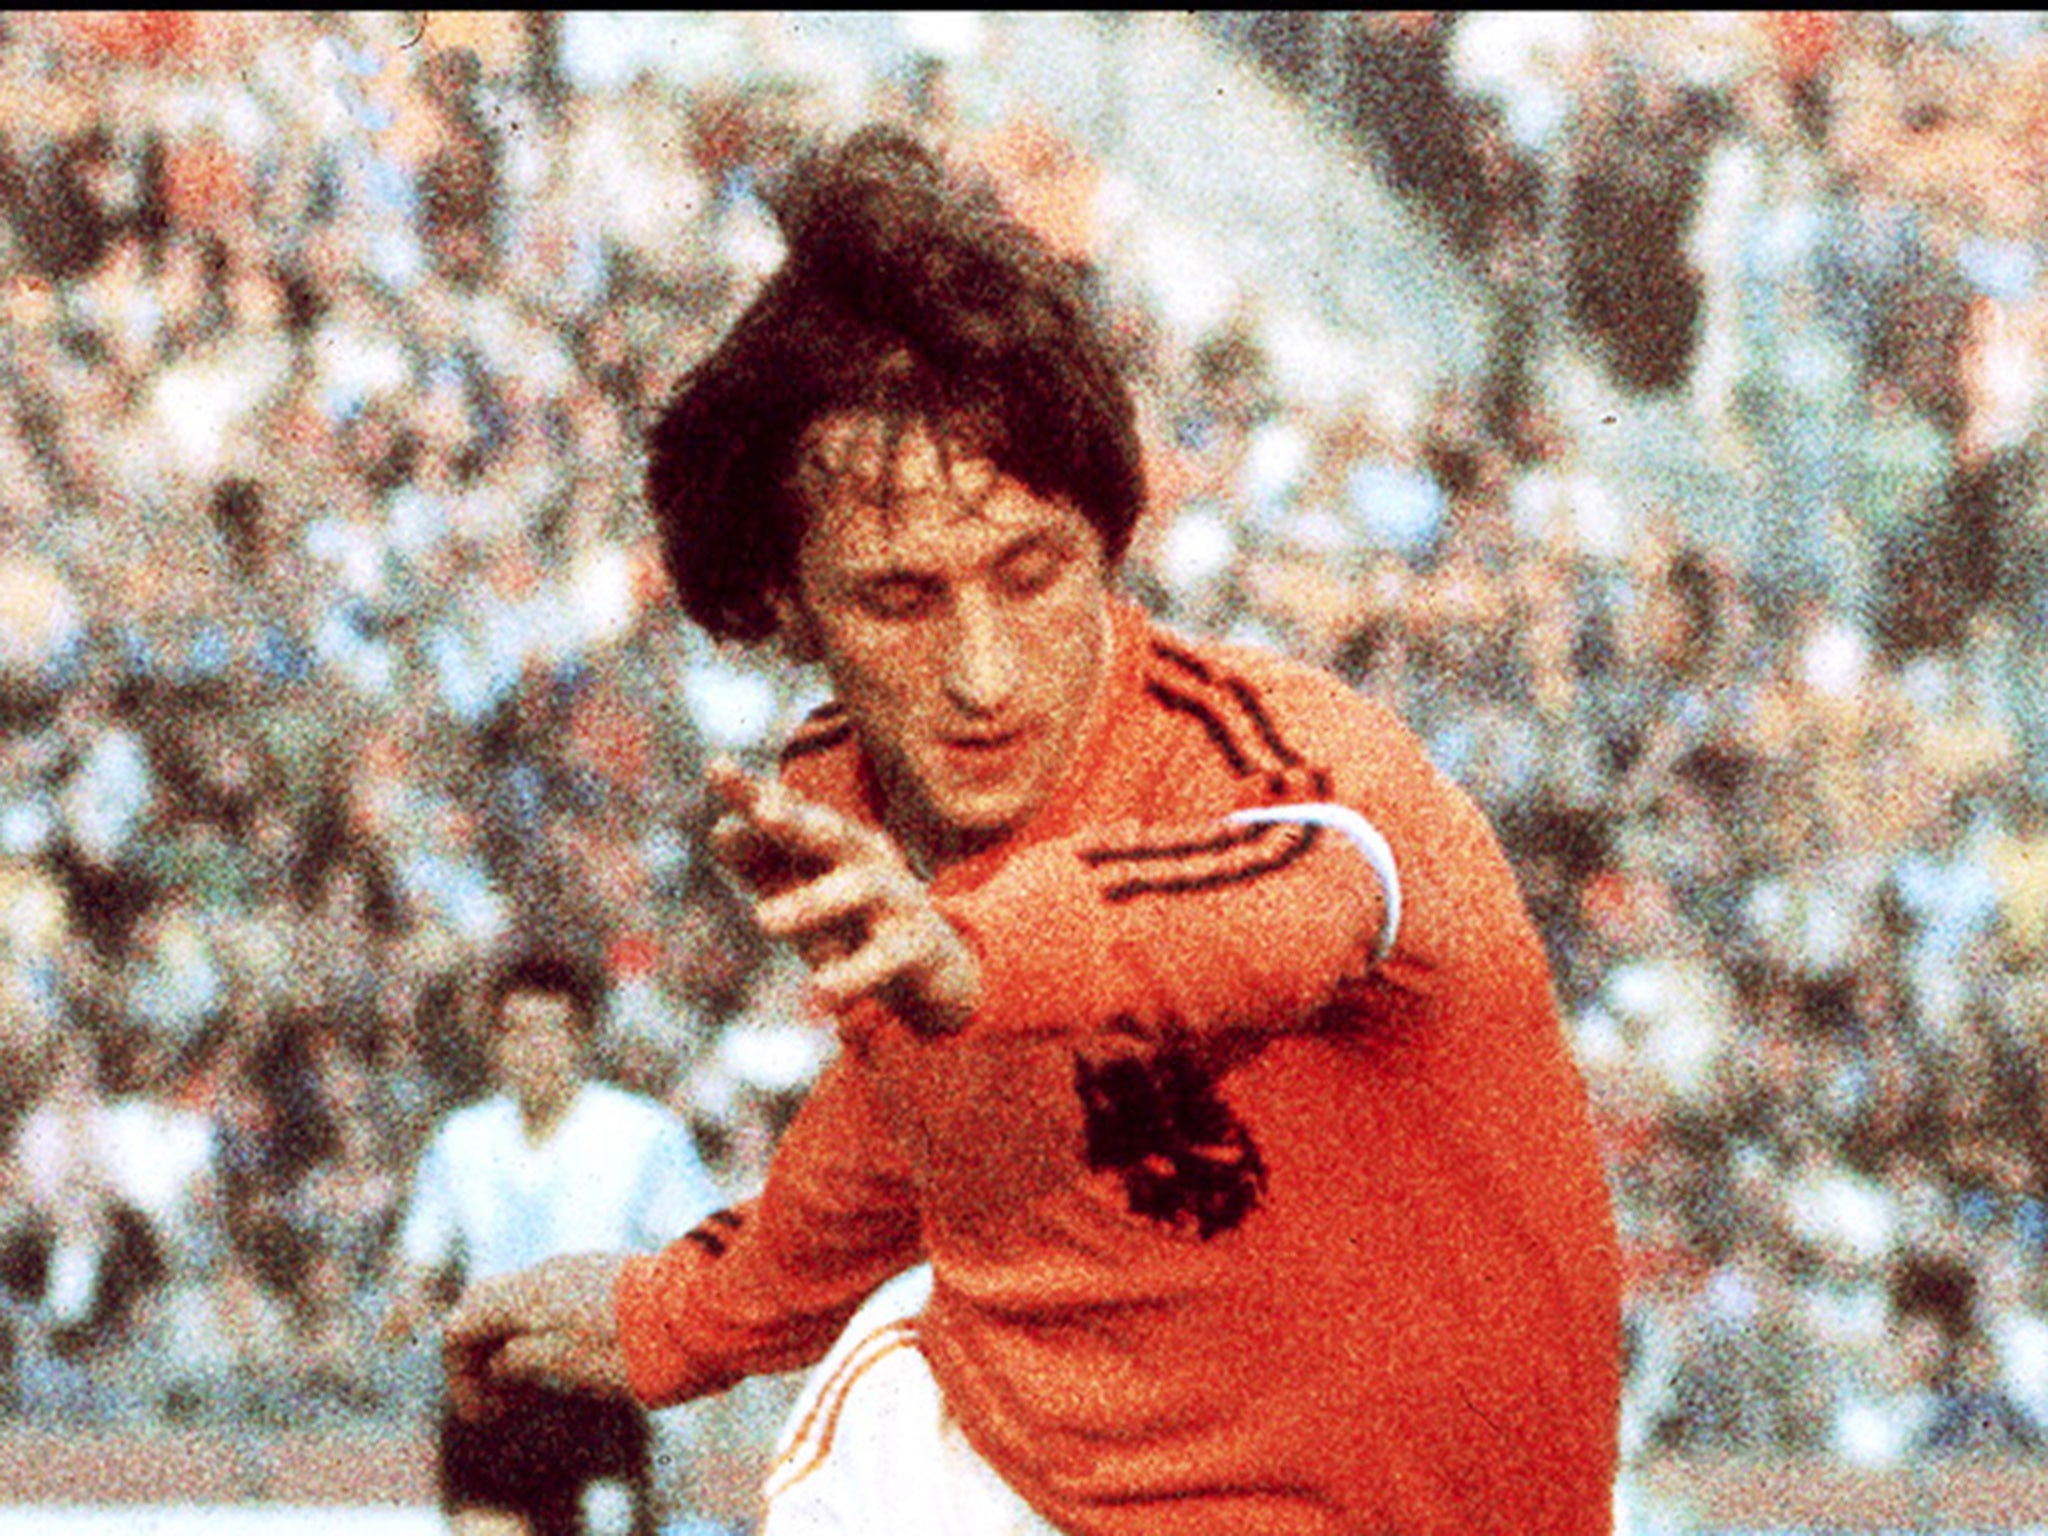 Johan Cruyff pictured wearing his two-striped shirt during the 1974 World Cup